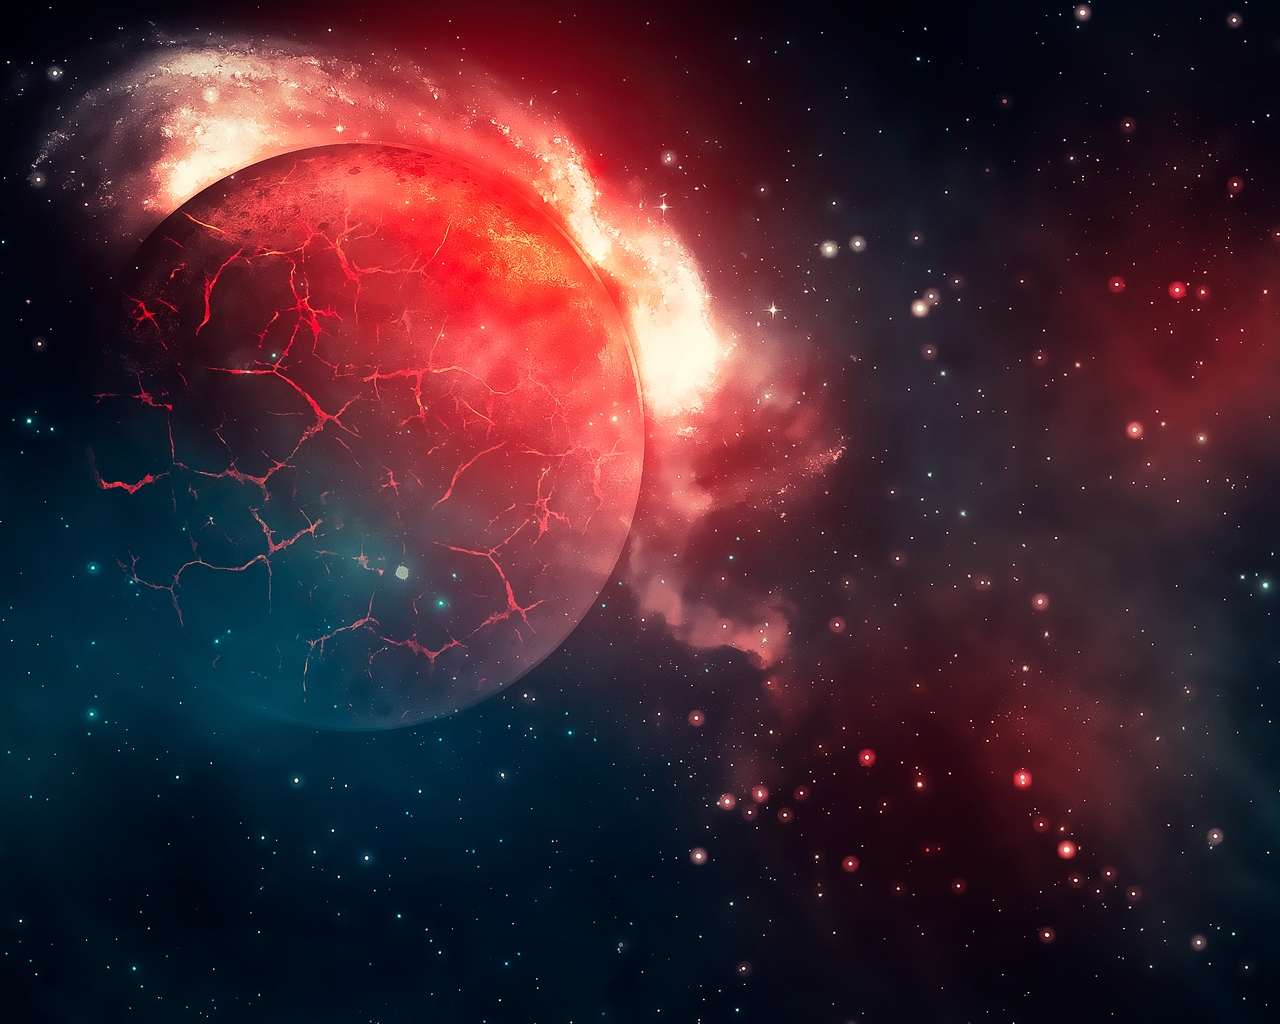 Space World Disaster for 1280 x 1024 resolution